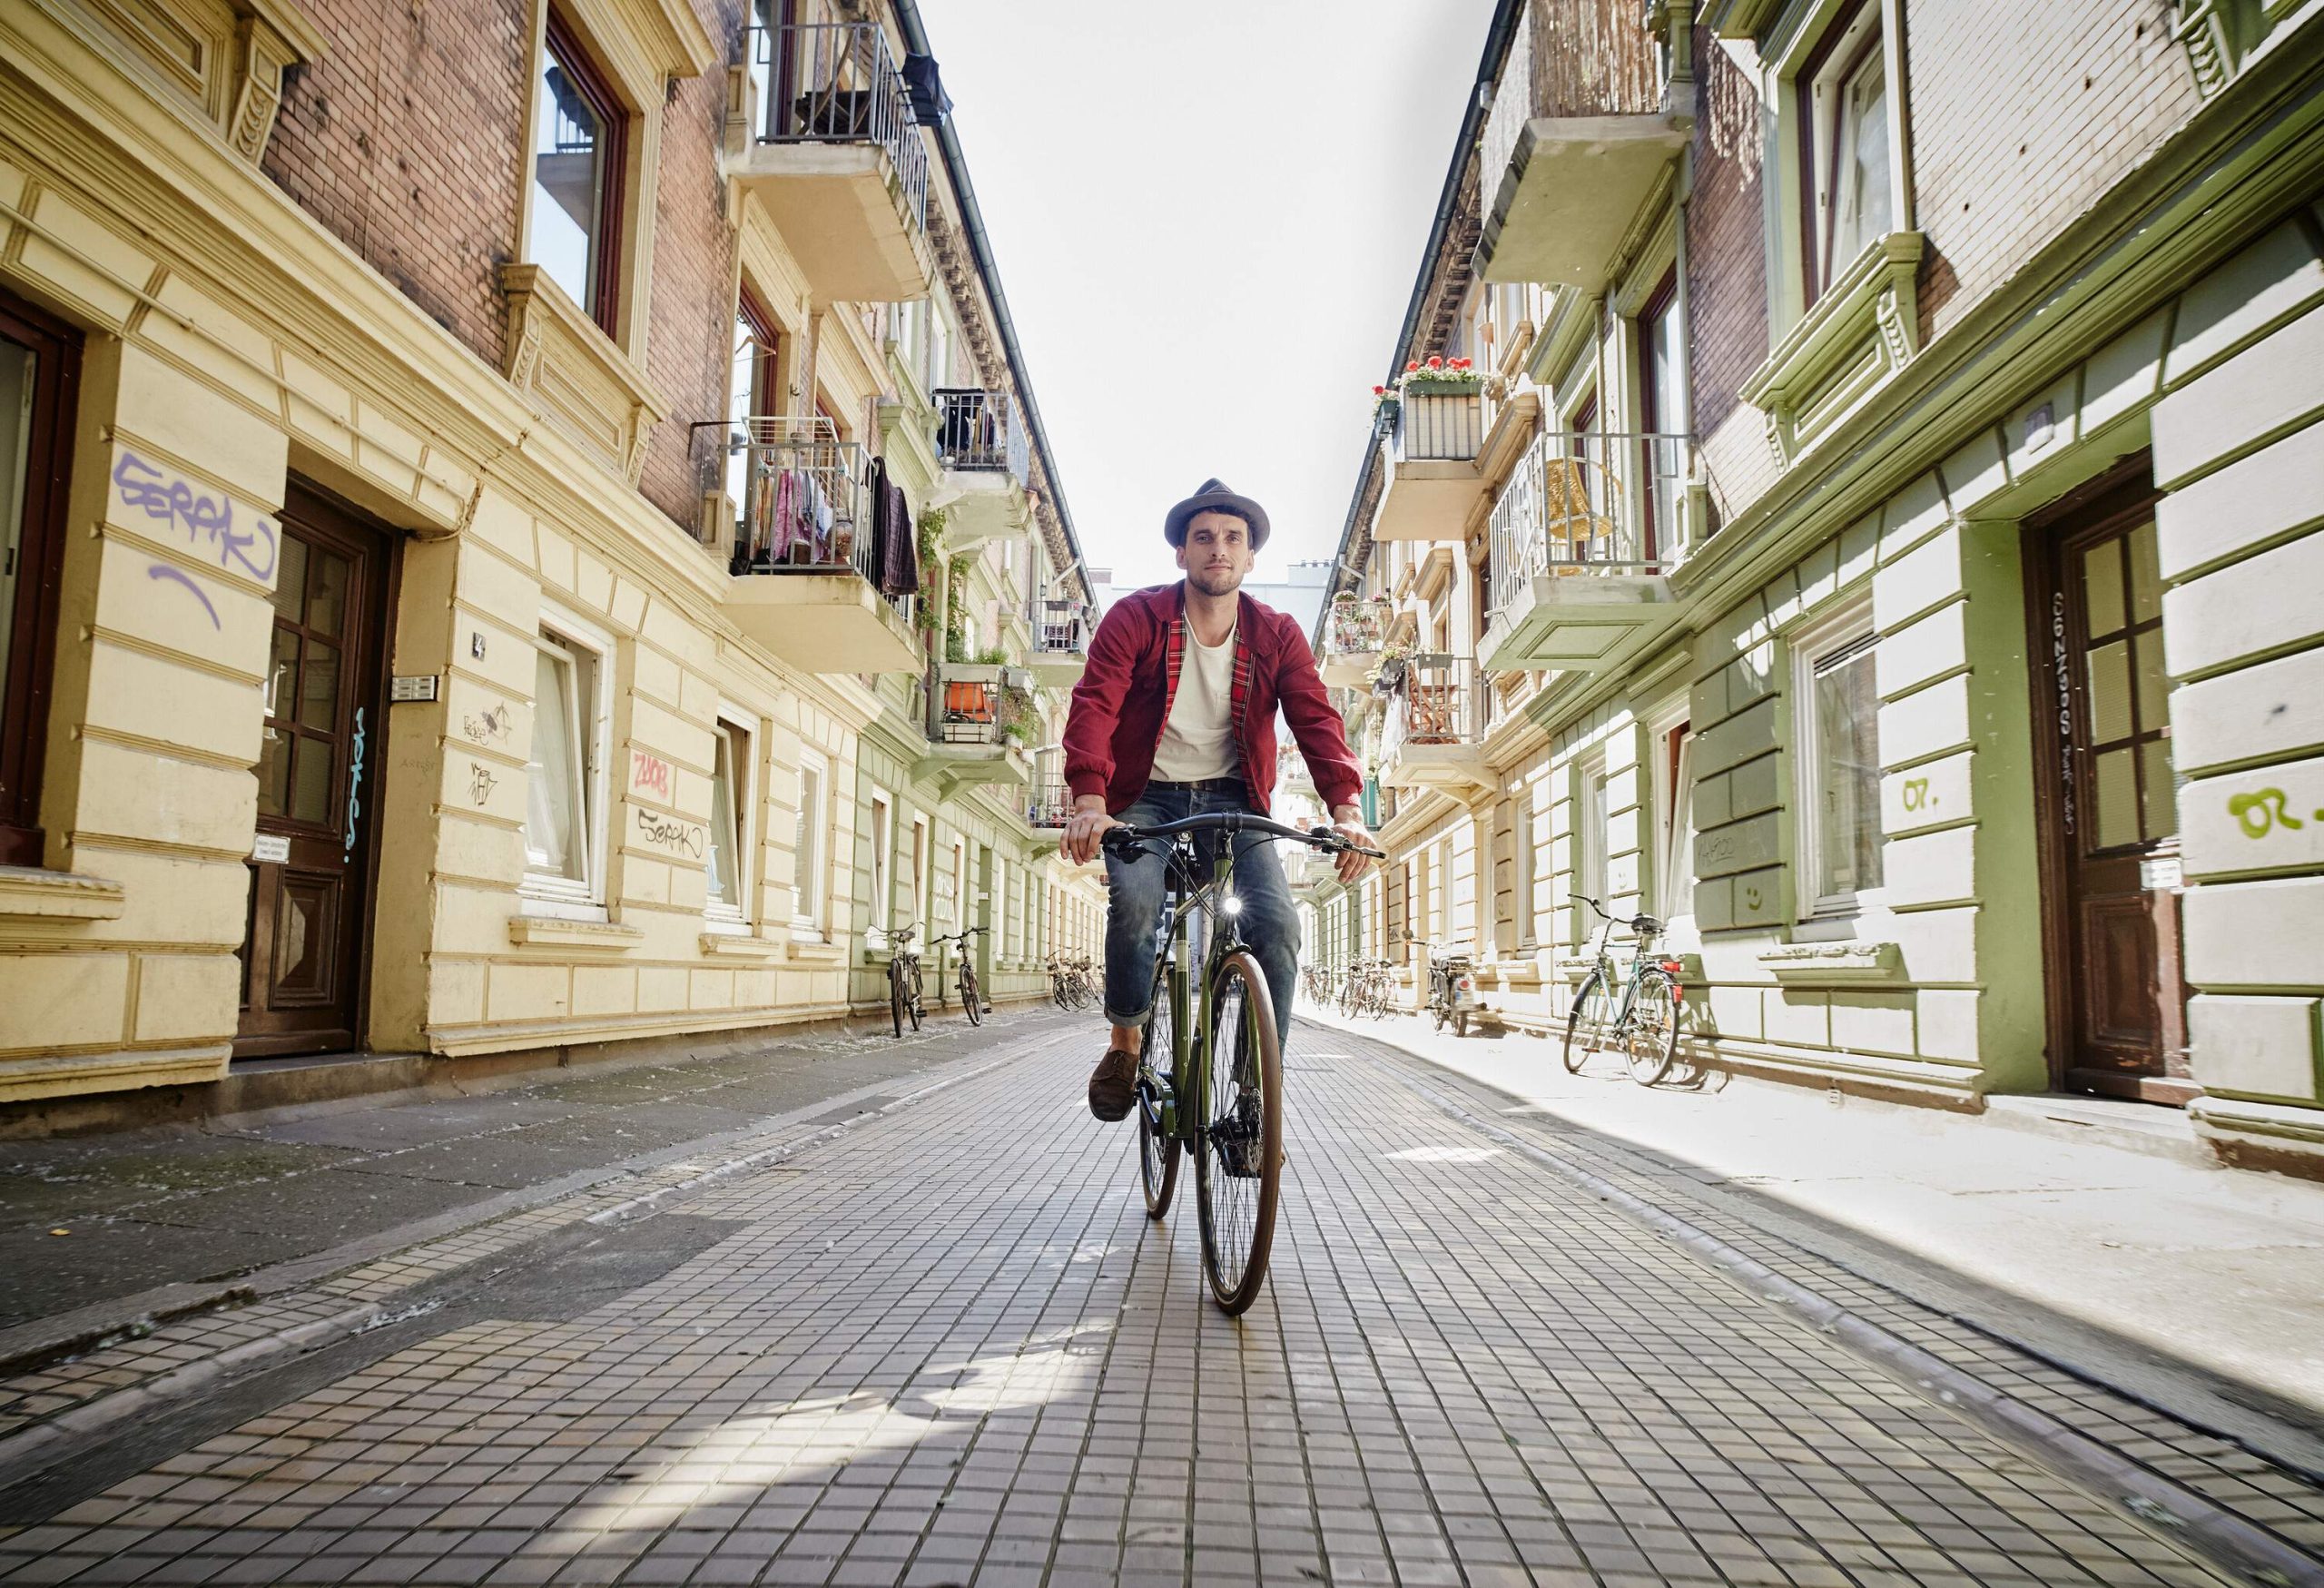 A man in a brown sweater and hat rides a bicycle as he travels on a street bordered by adjacent apartment buildings.